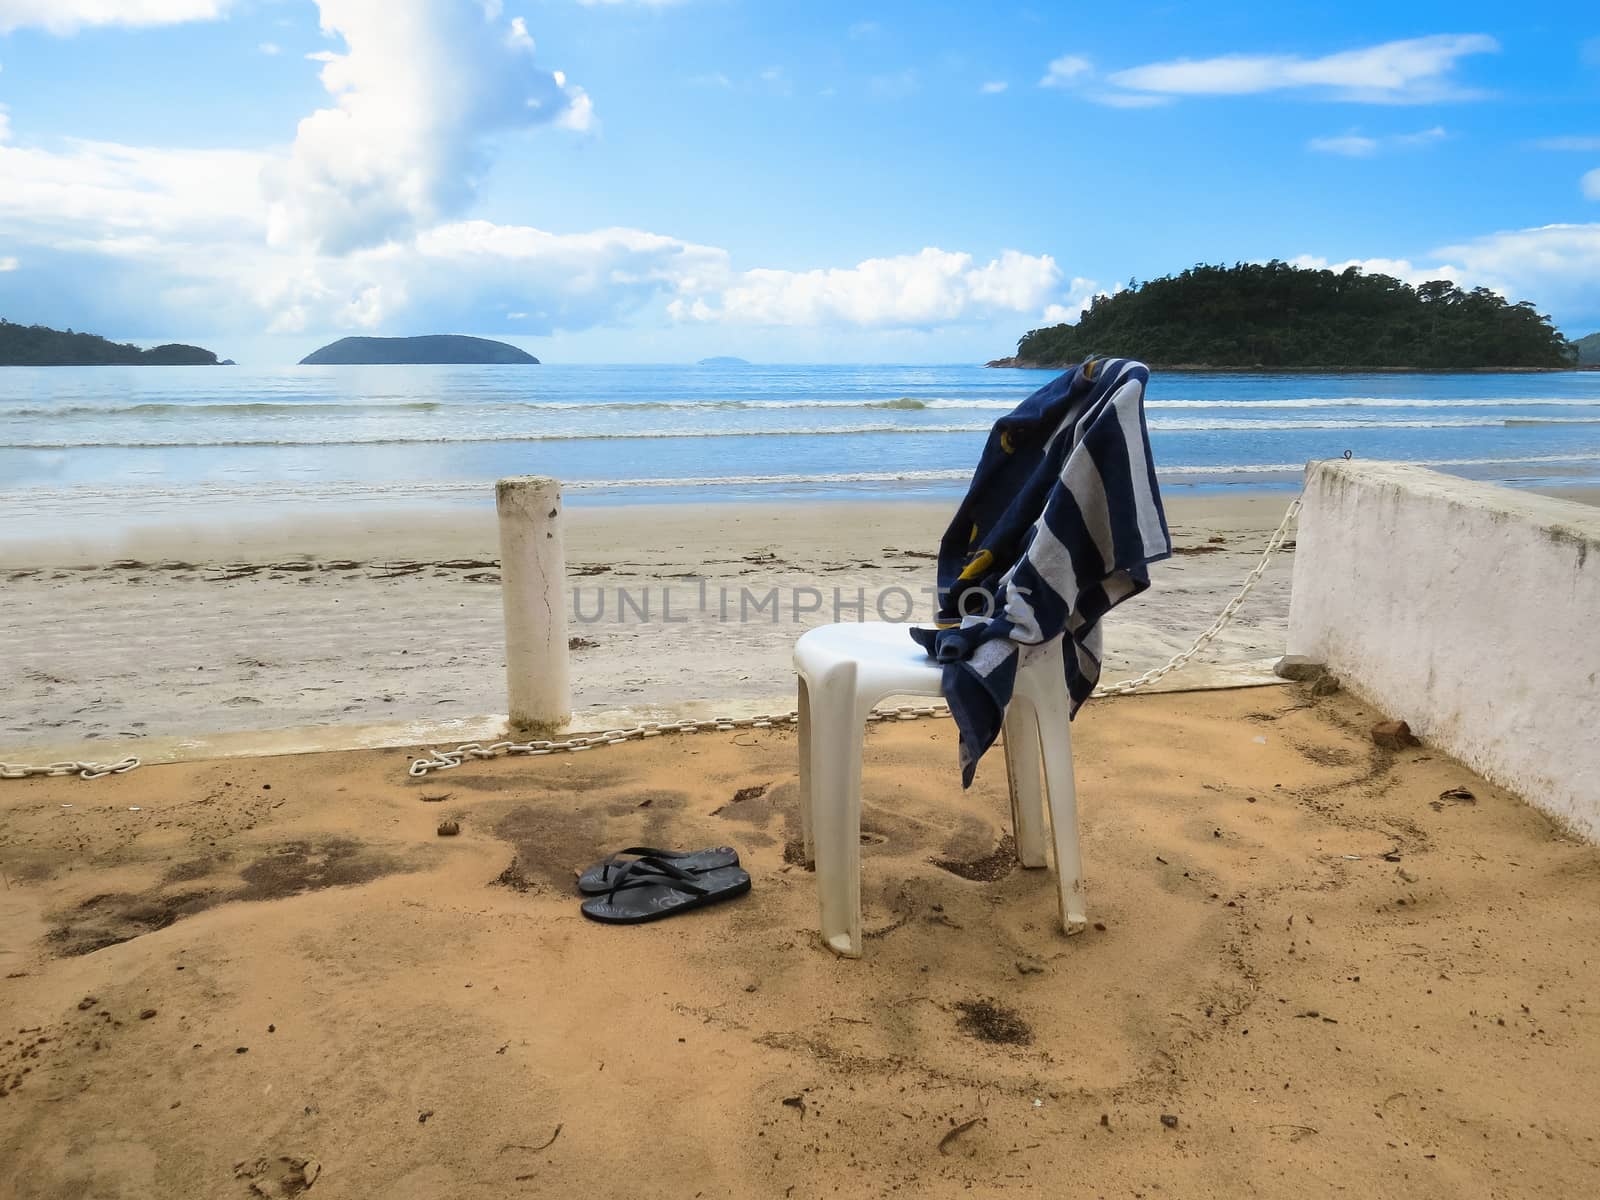 View of the quiet and deserted beach in sunny day, with a chair and a towel.